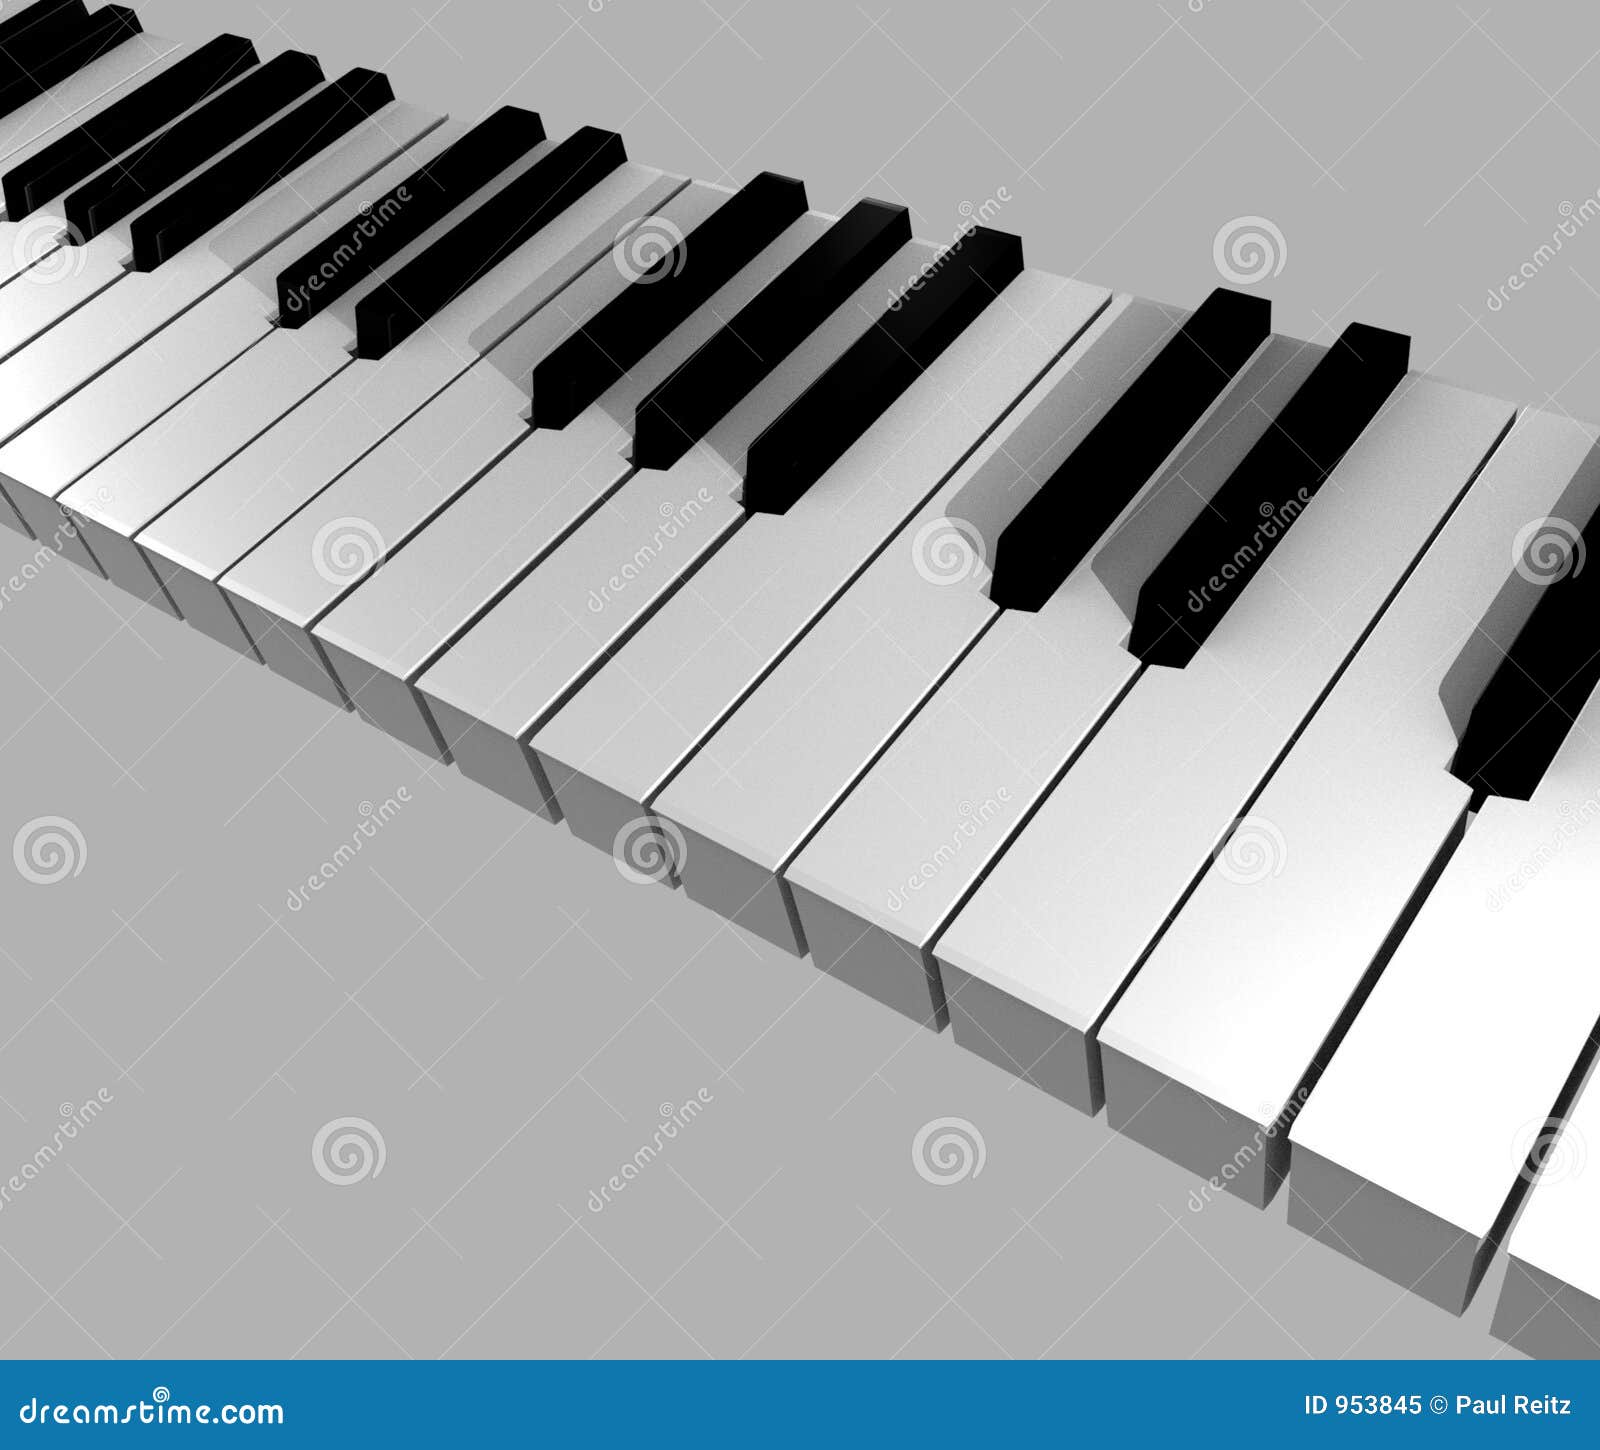 3d Render Of Piano Keys Stock Photo, Picture and Royalty Free